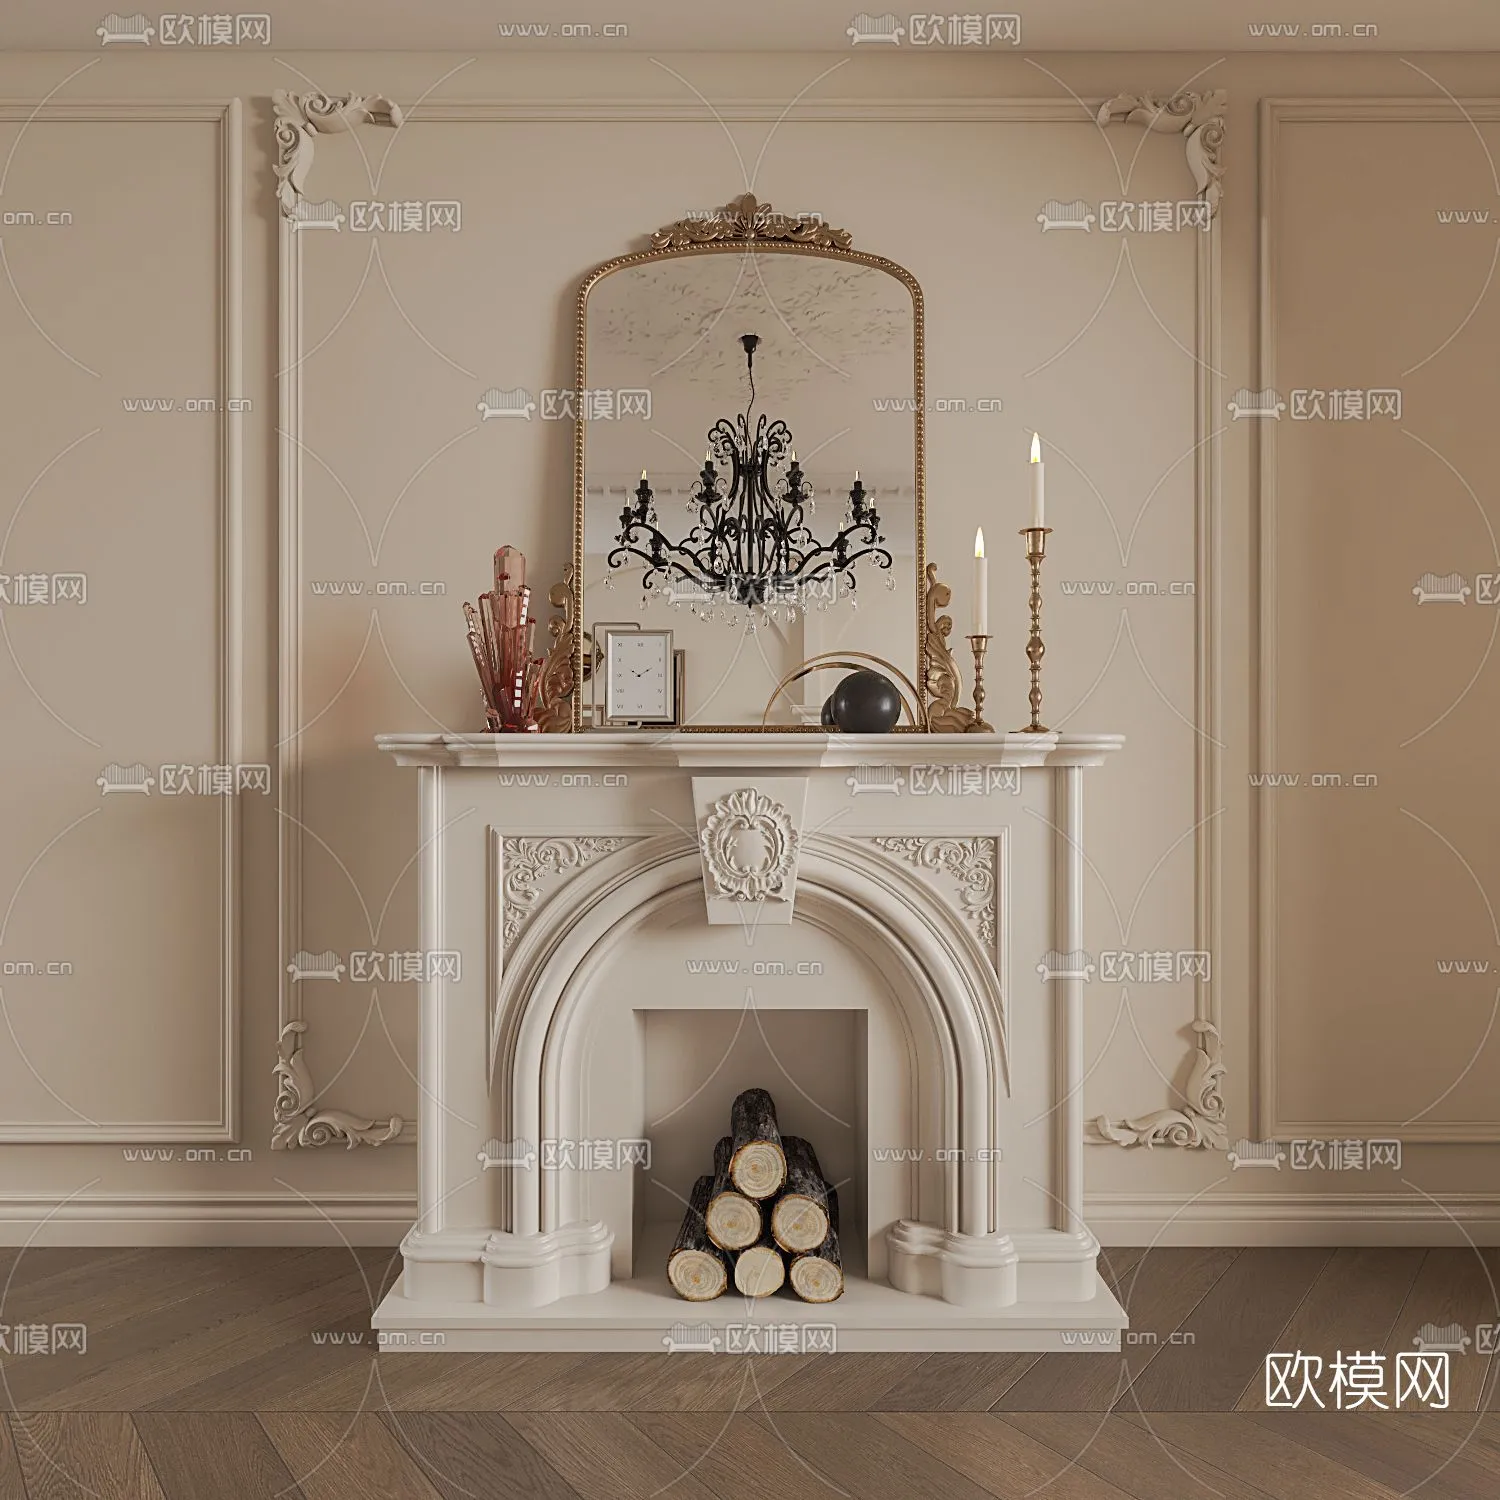 CLASSIC – FIREPLACE 3DMODELS – 084